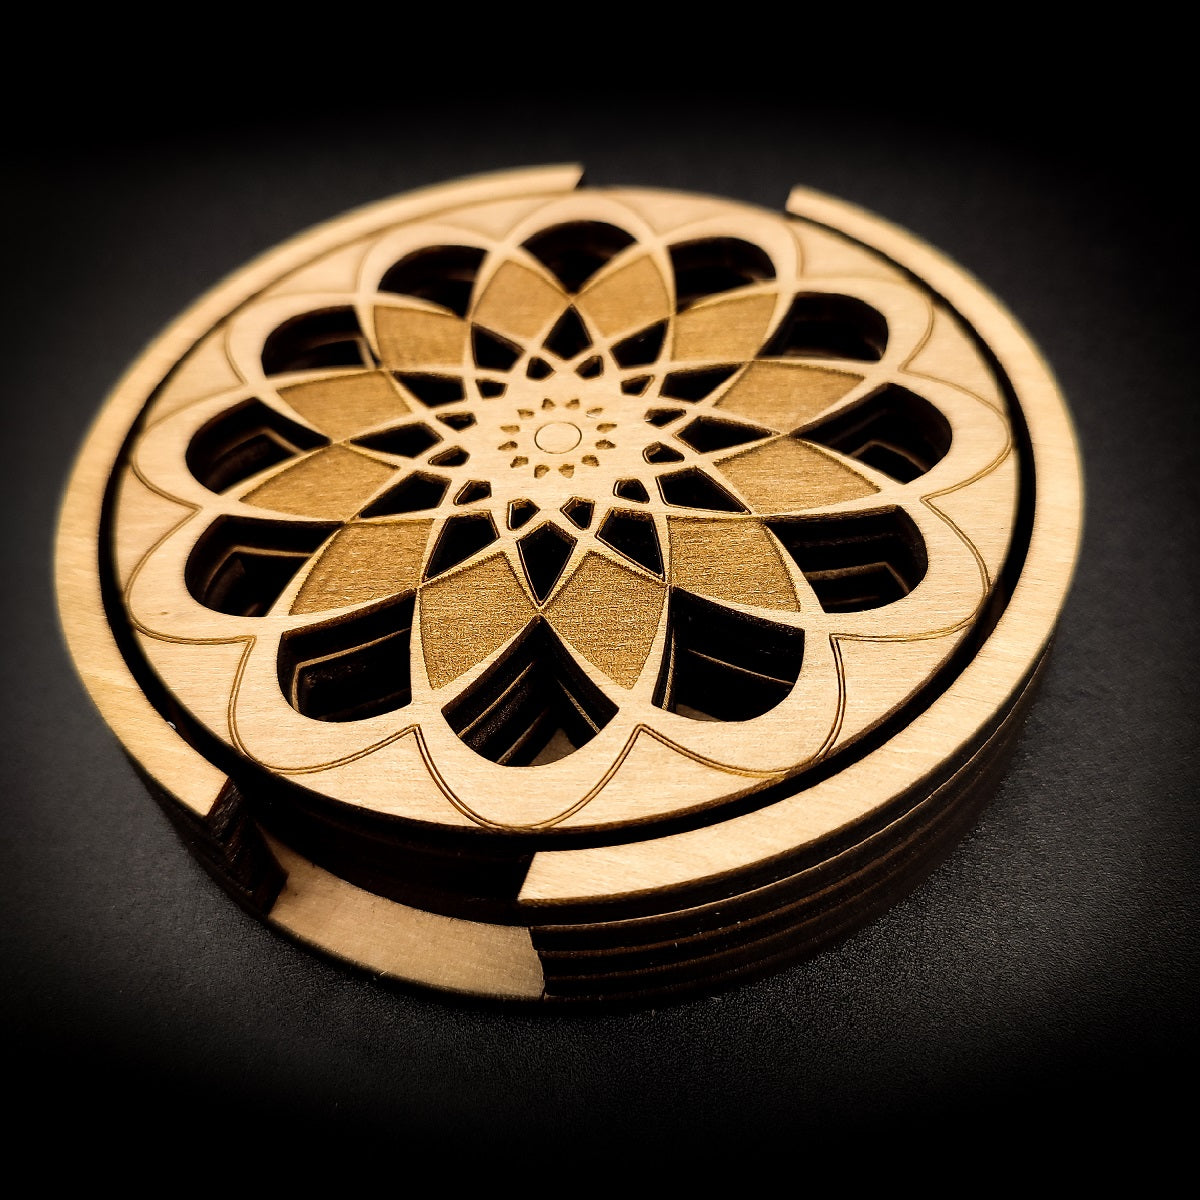 Set of 4 Rosace Mandala coasters with its wooden stand